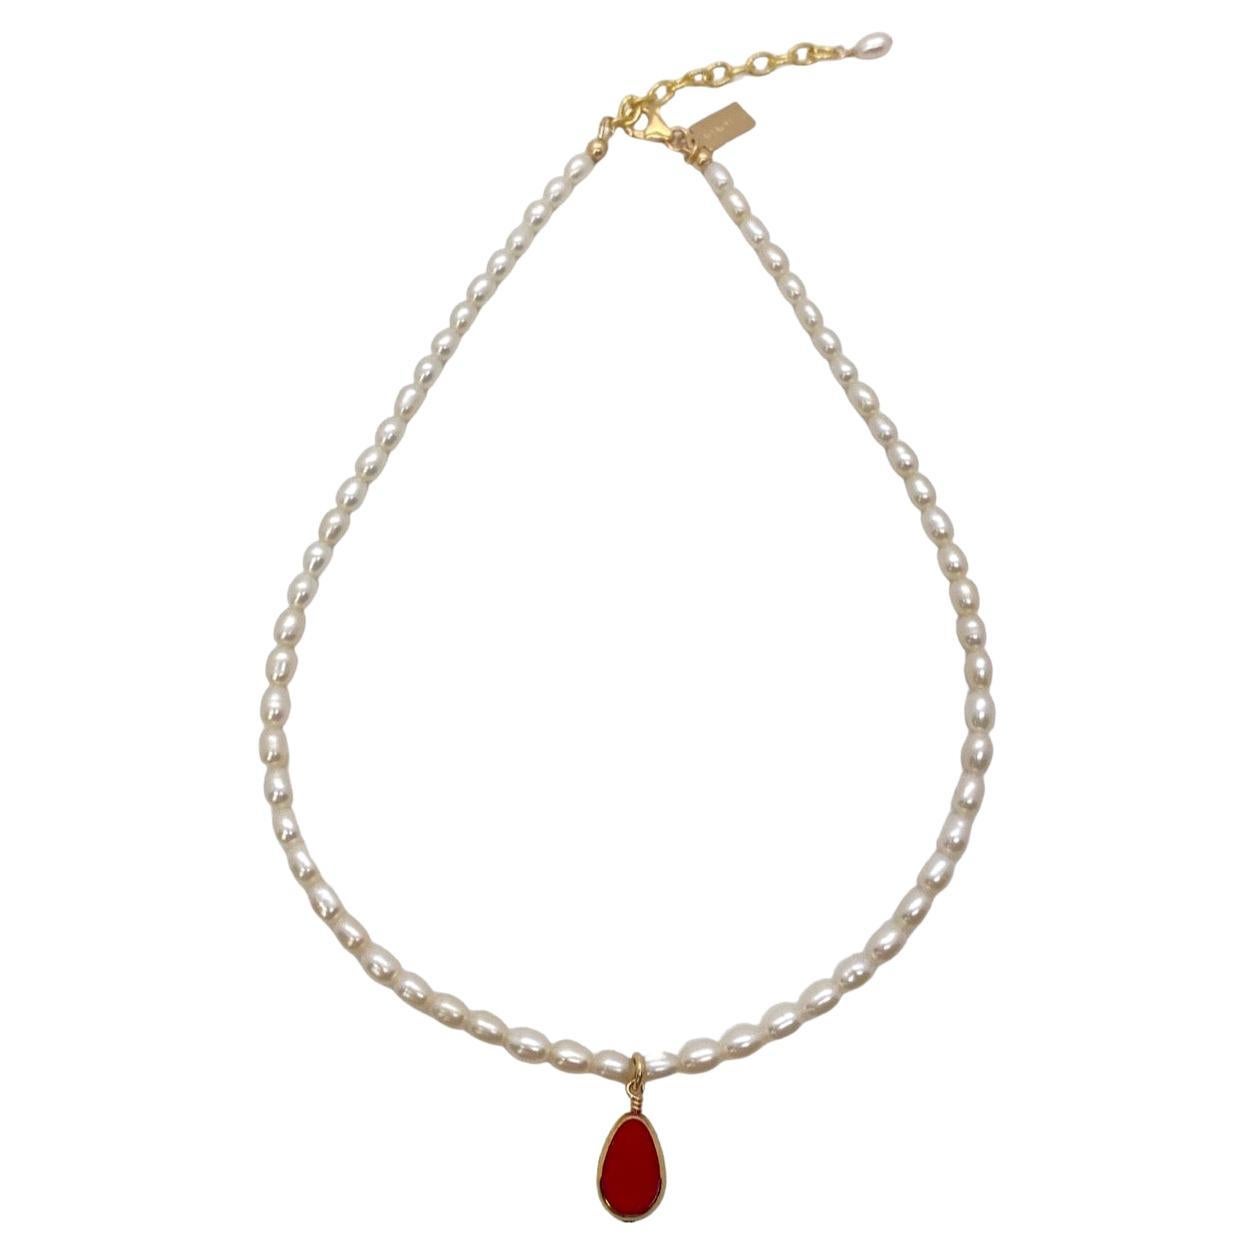 Red Vintage German Glass Beads edged with 24K gold on Pearls, Alex Necklace